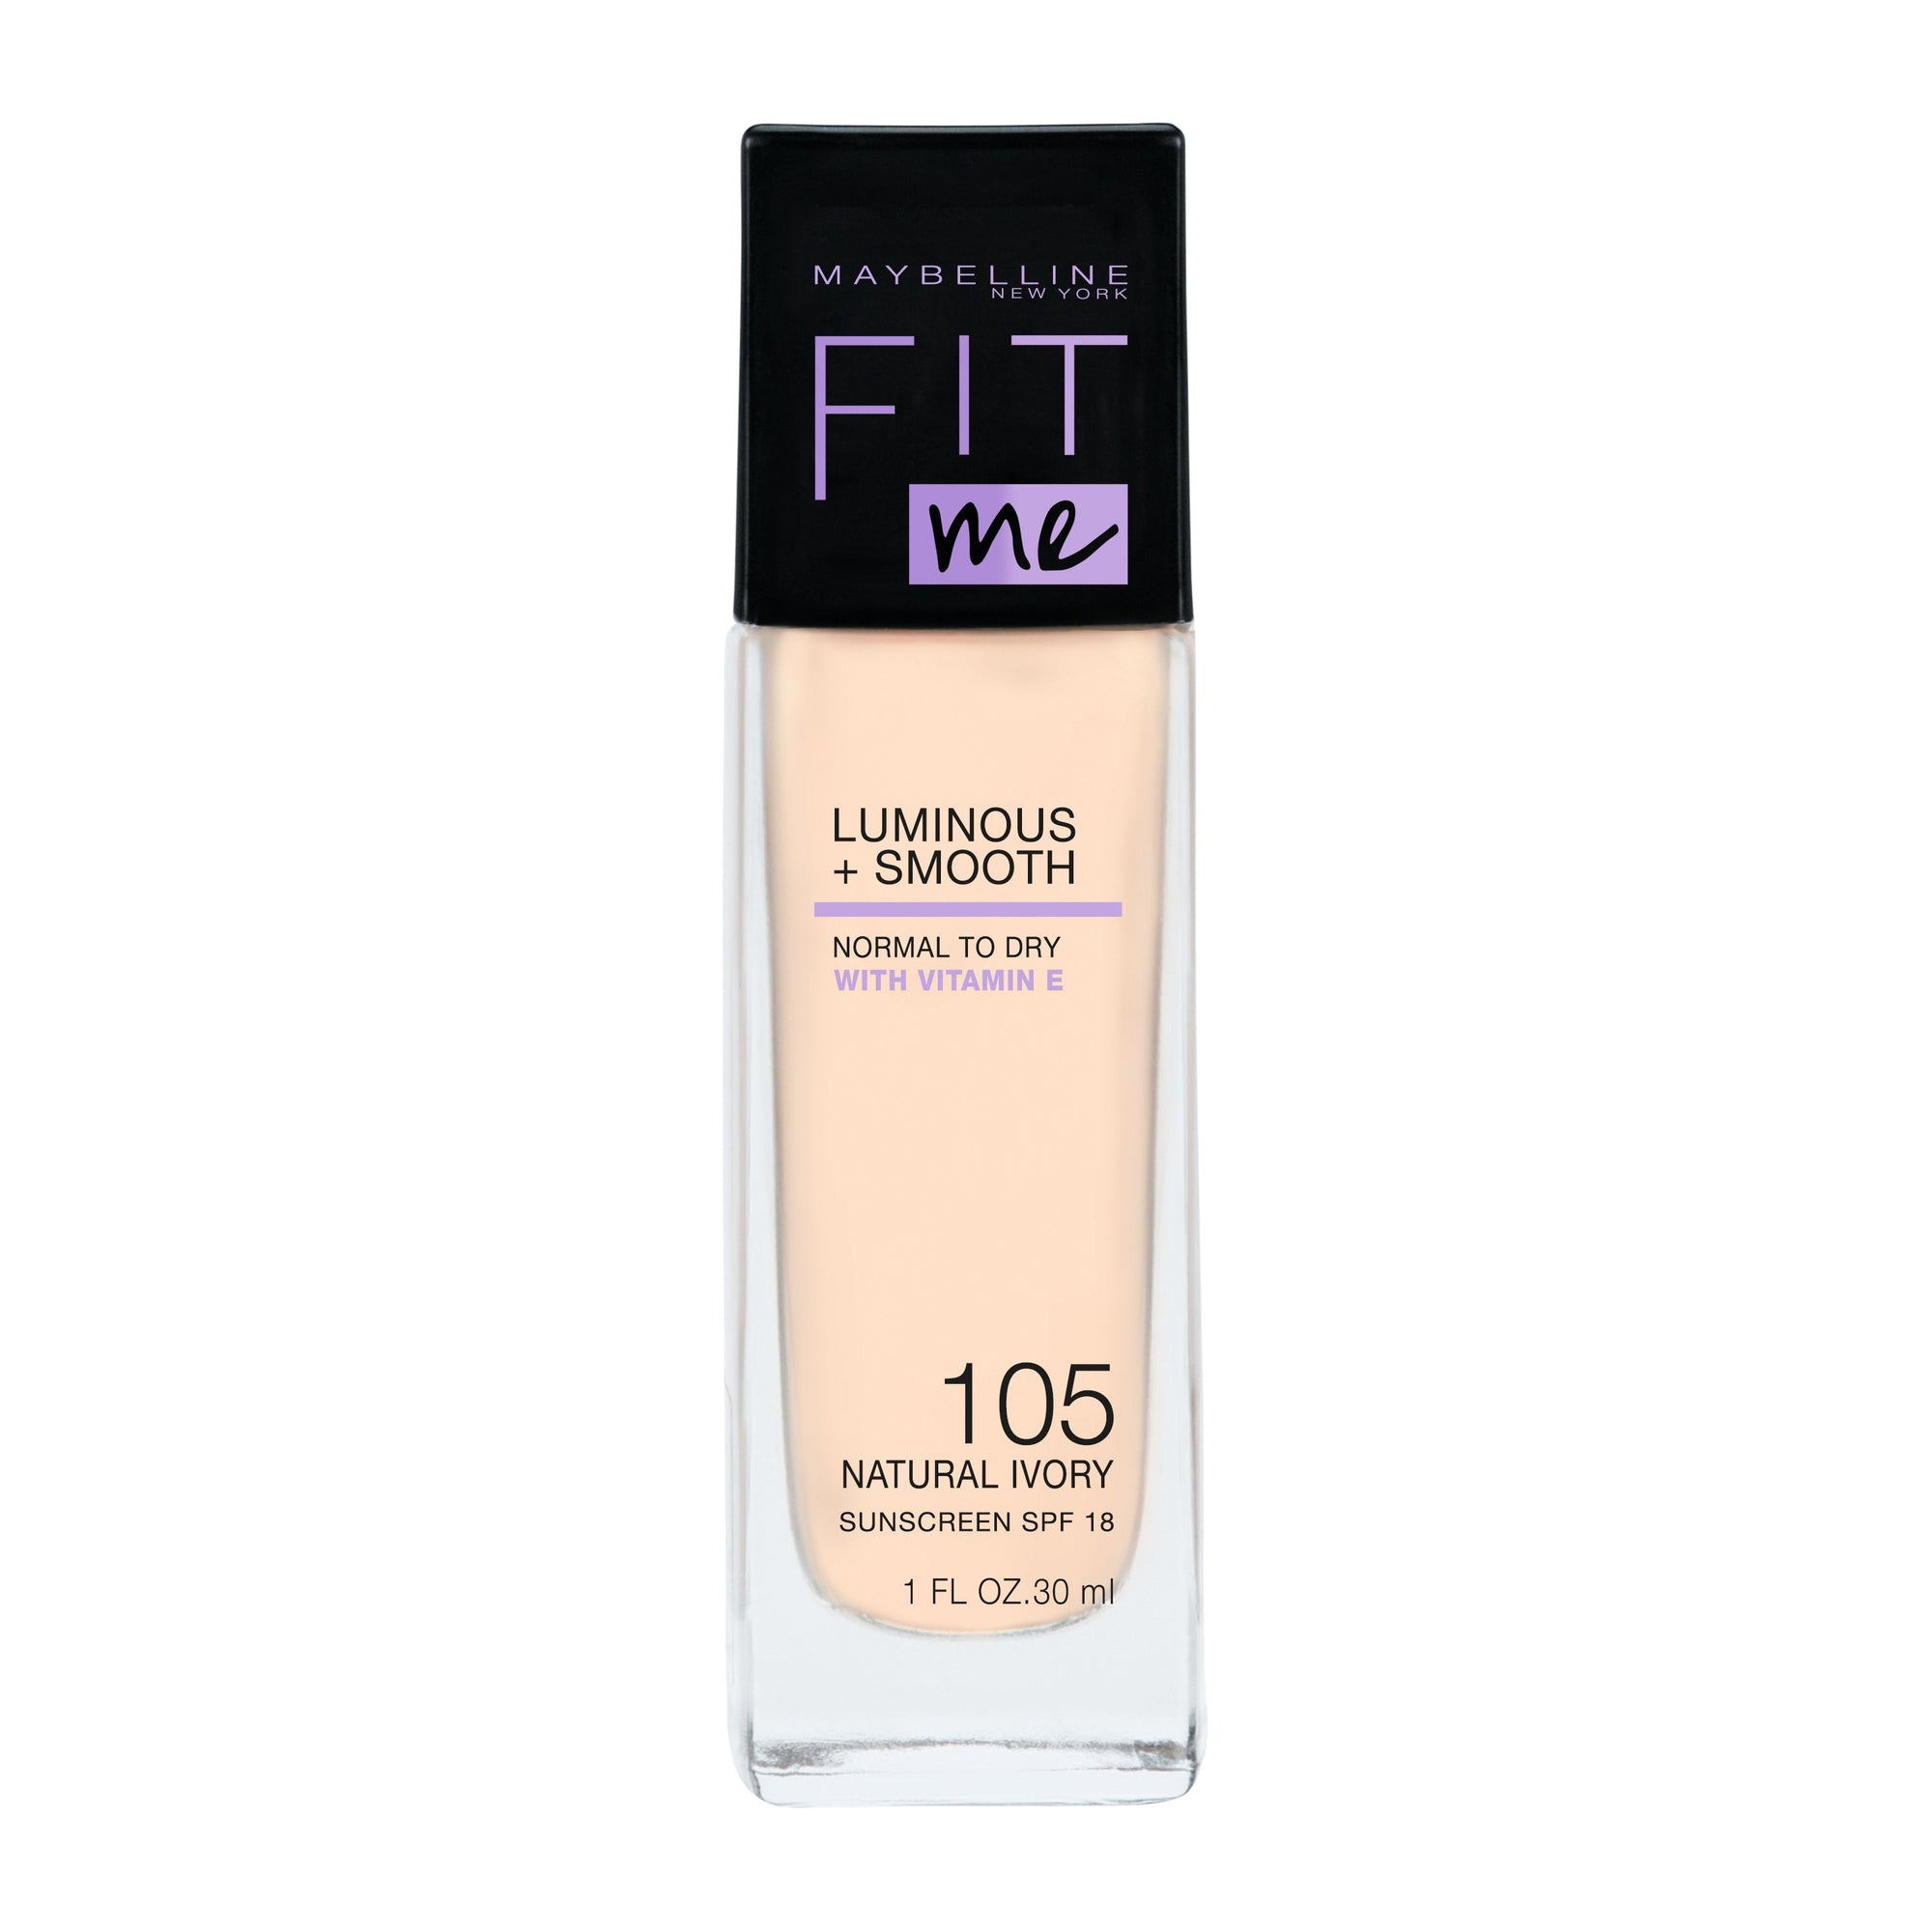 Maybelline Fit Me Luminous + Smooth Foundation